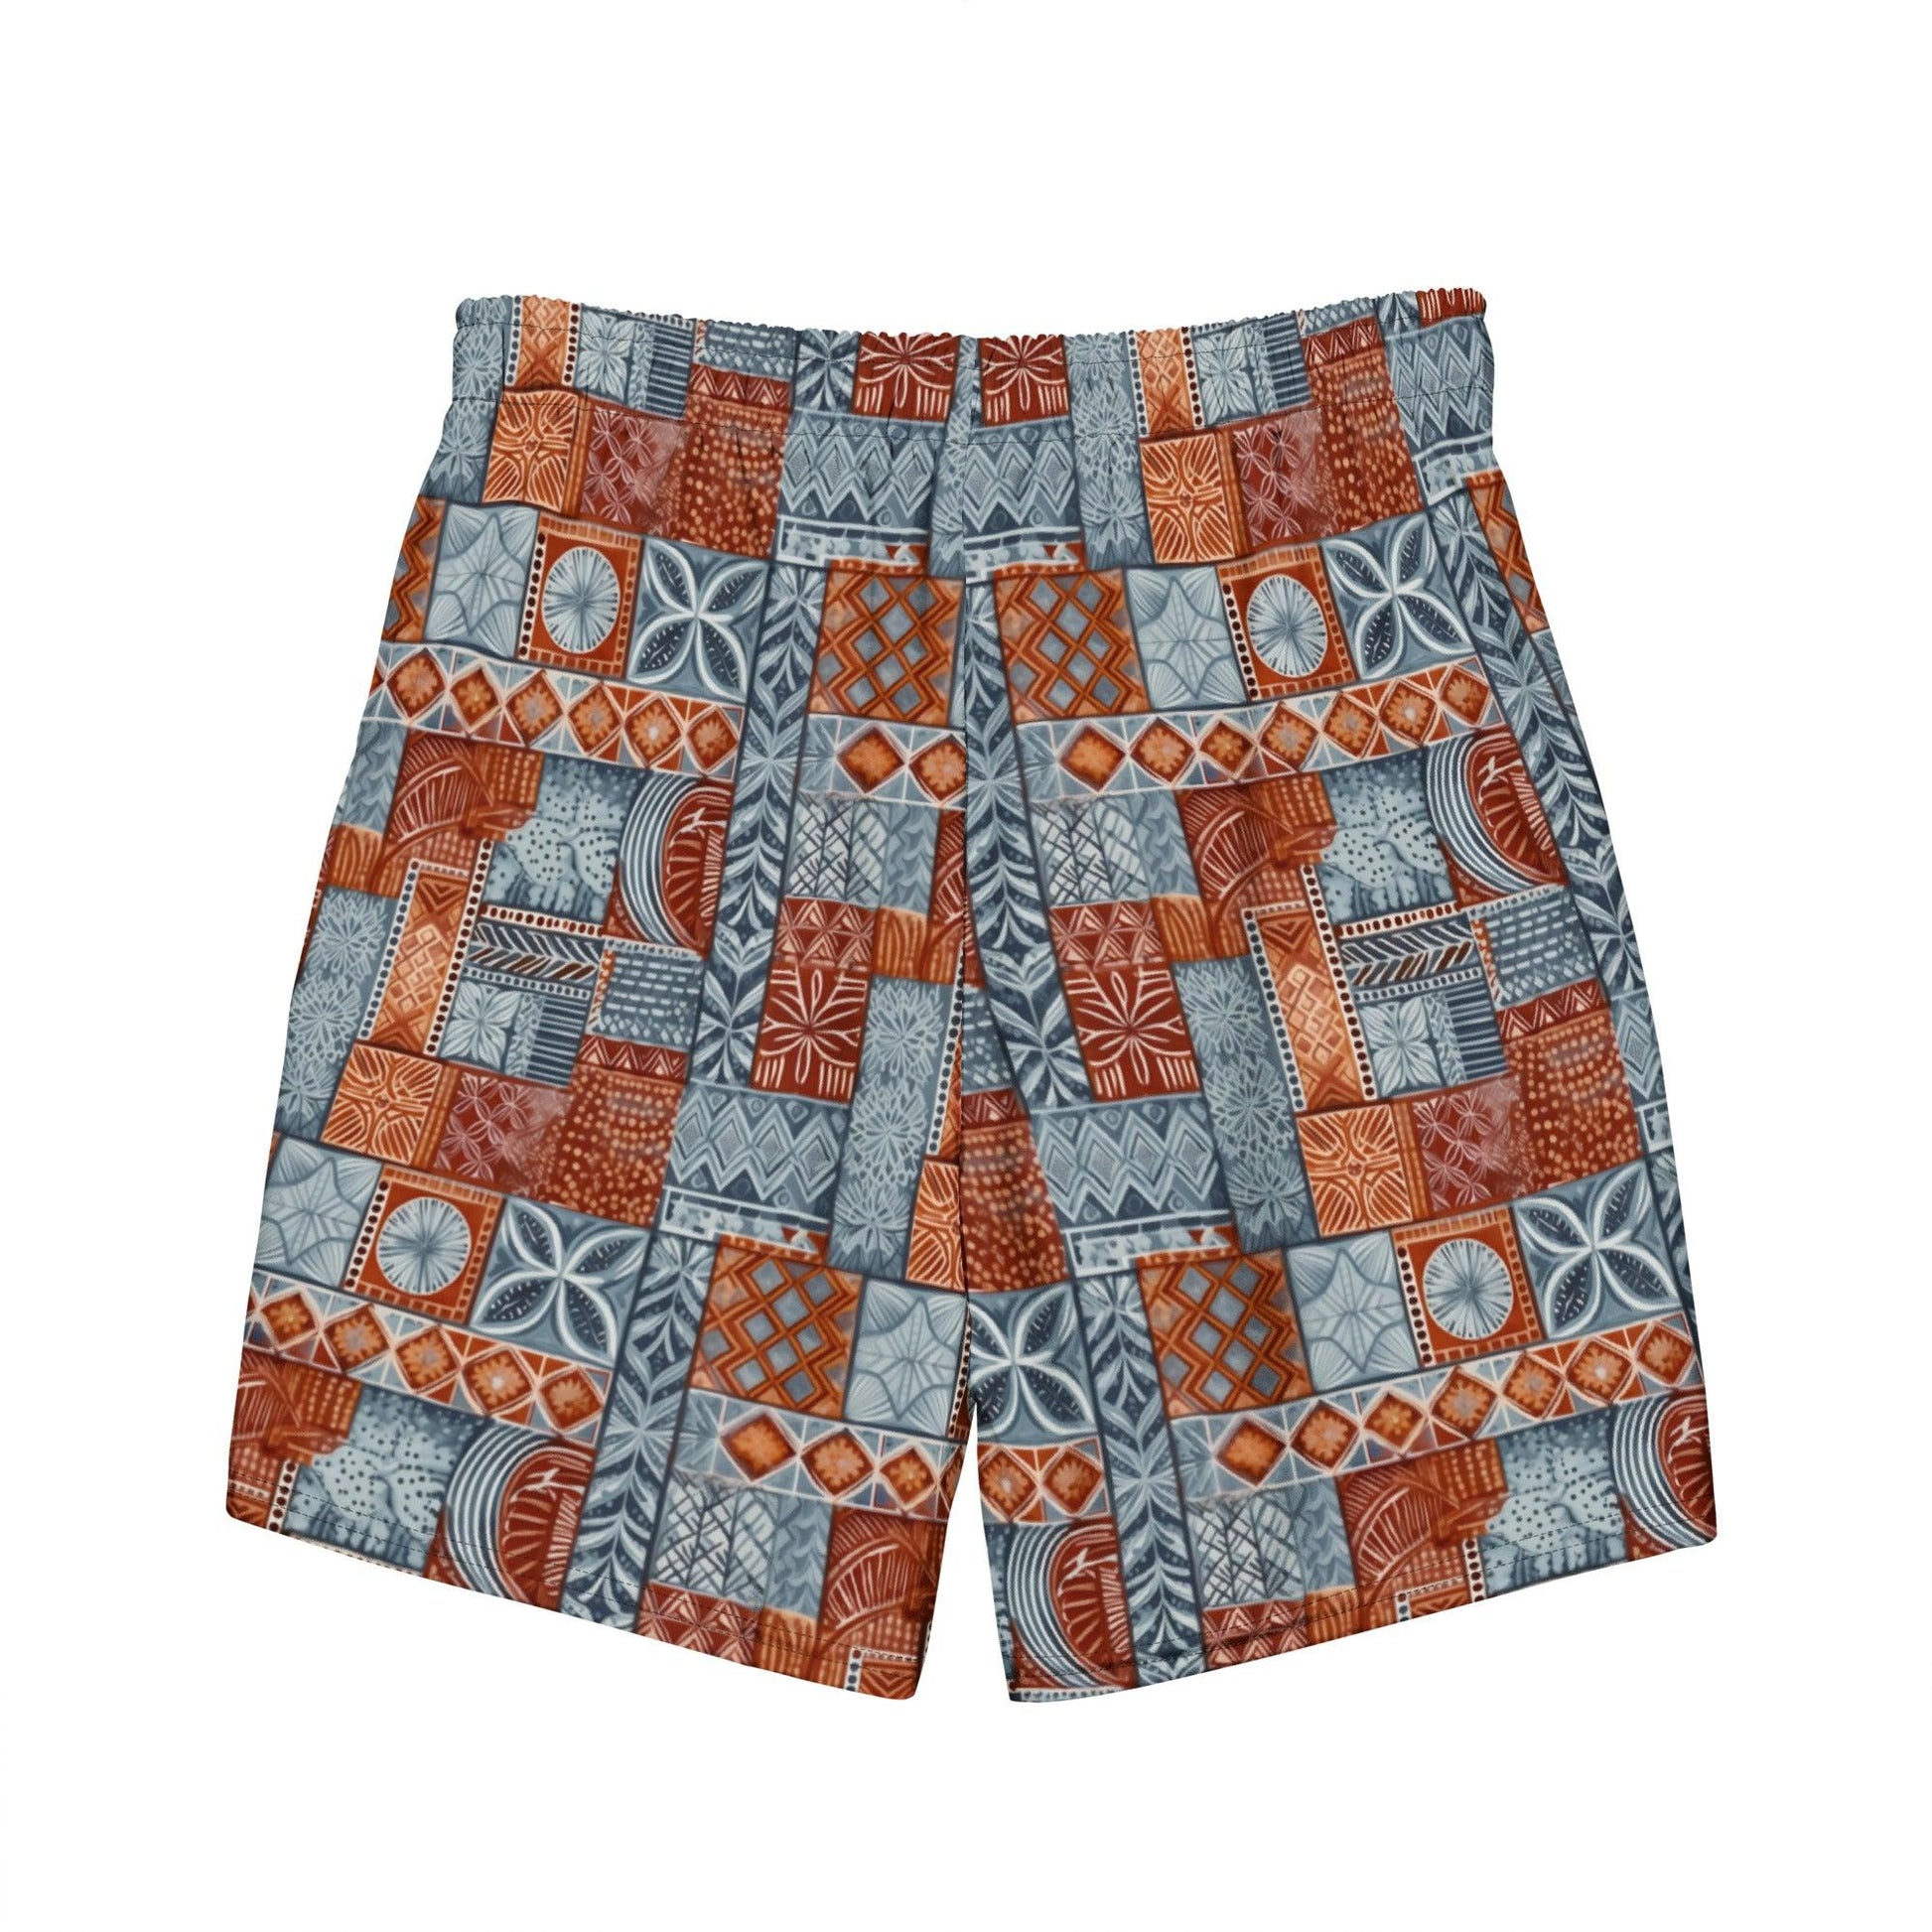 Pacific Islands Tapa Cloth Recycled Men's Swim Trunks - The Global Wanderer